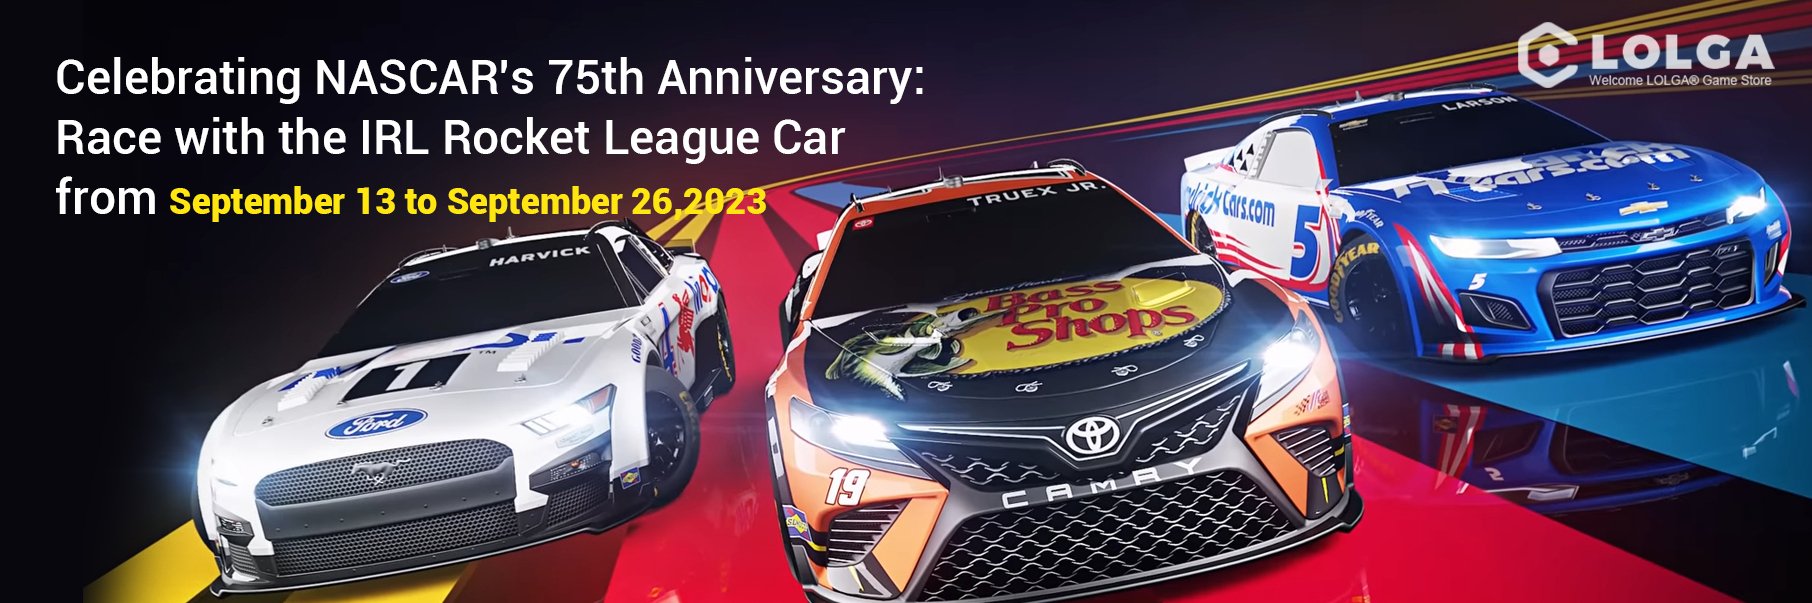 Celebrating NASCAR's 75th Anniversary: Race with the IRL Rocket League Car  from September 13 to September 26,2023